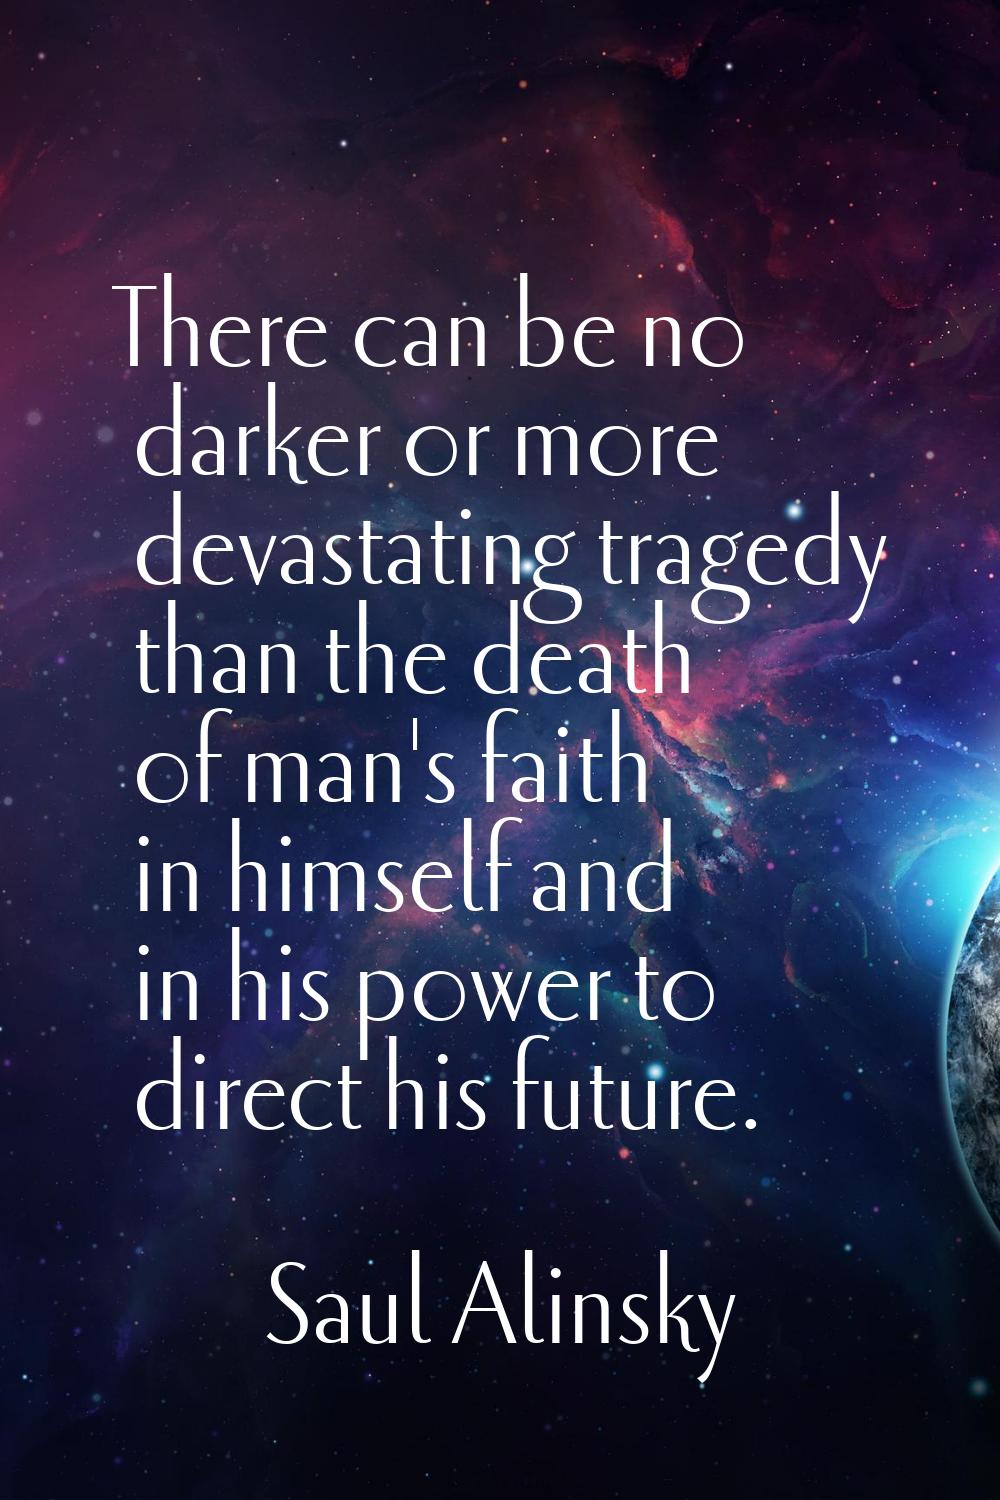 There can be no darker or more devastating tragedy than the death of man's faith in himself and in 